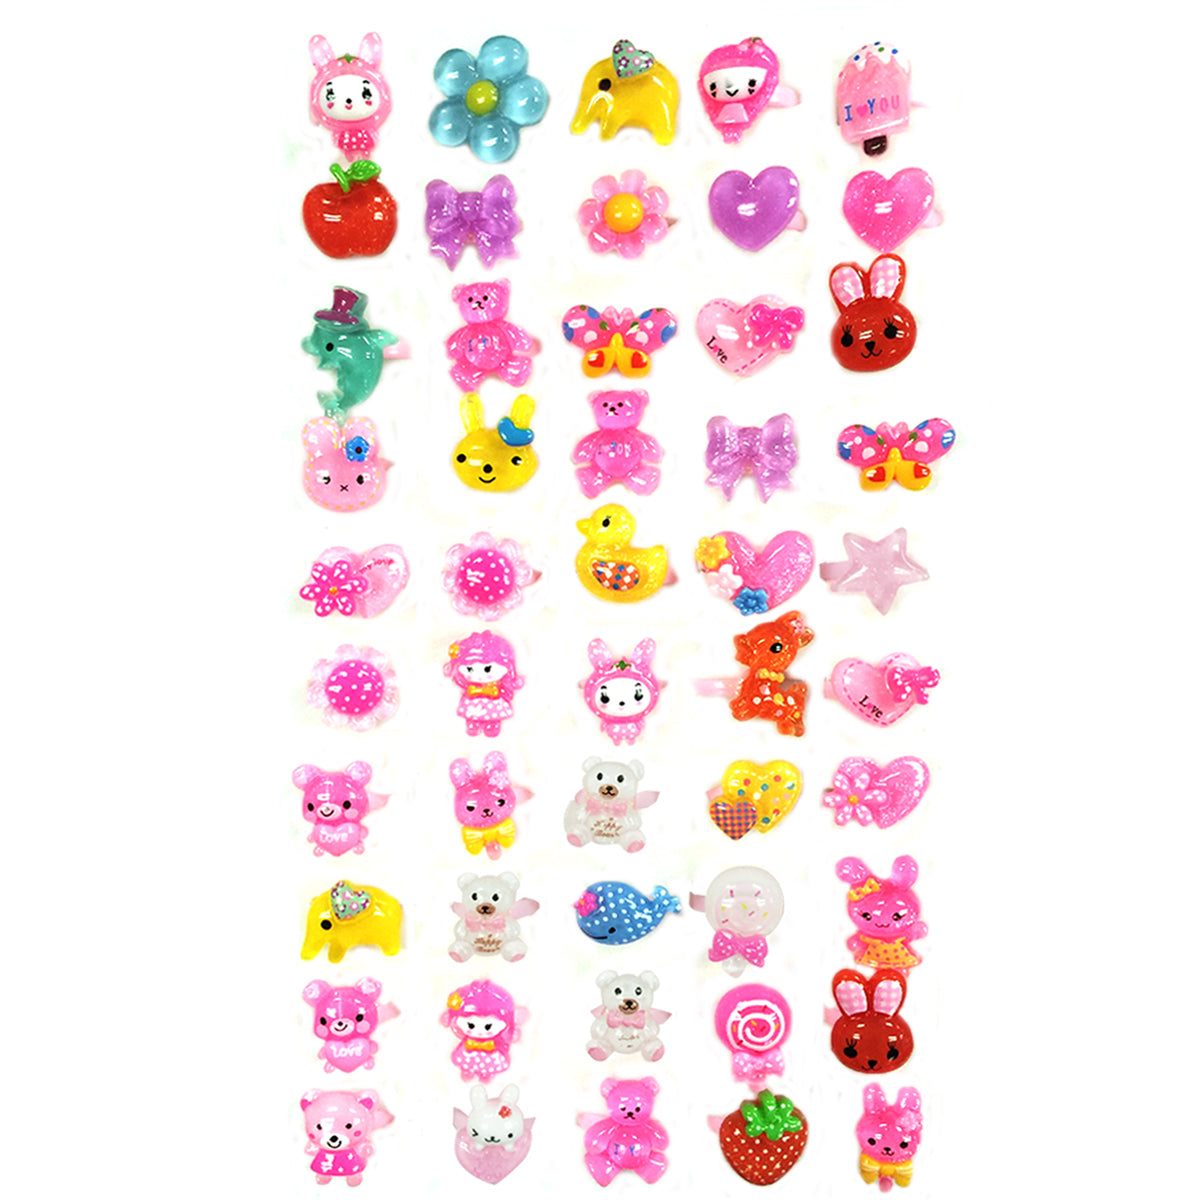 Wrapables Children's Cute Cartoon Rings Party Favor Rings (Set of 50), Random